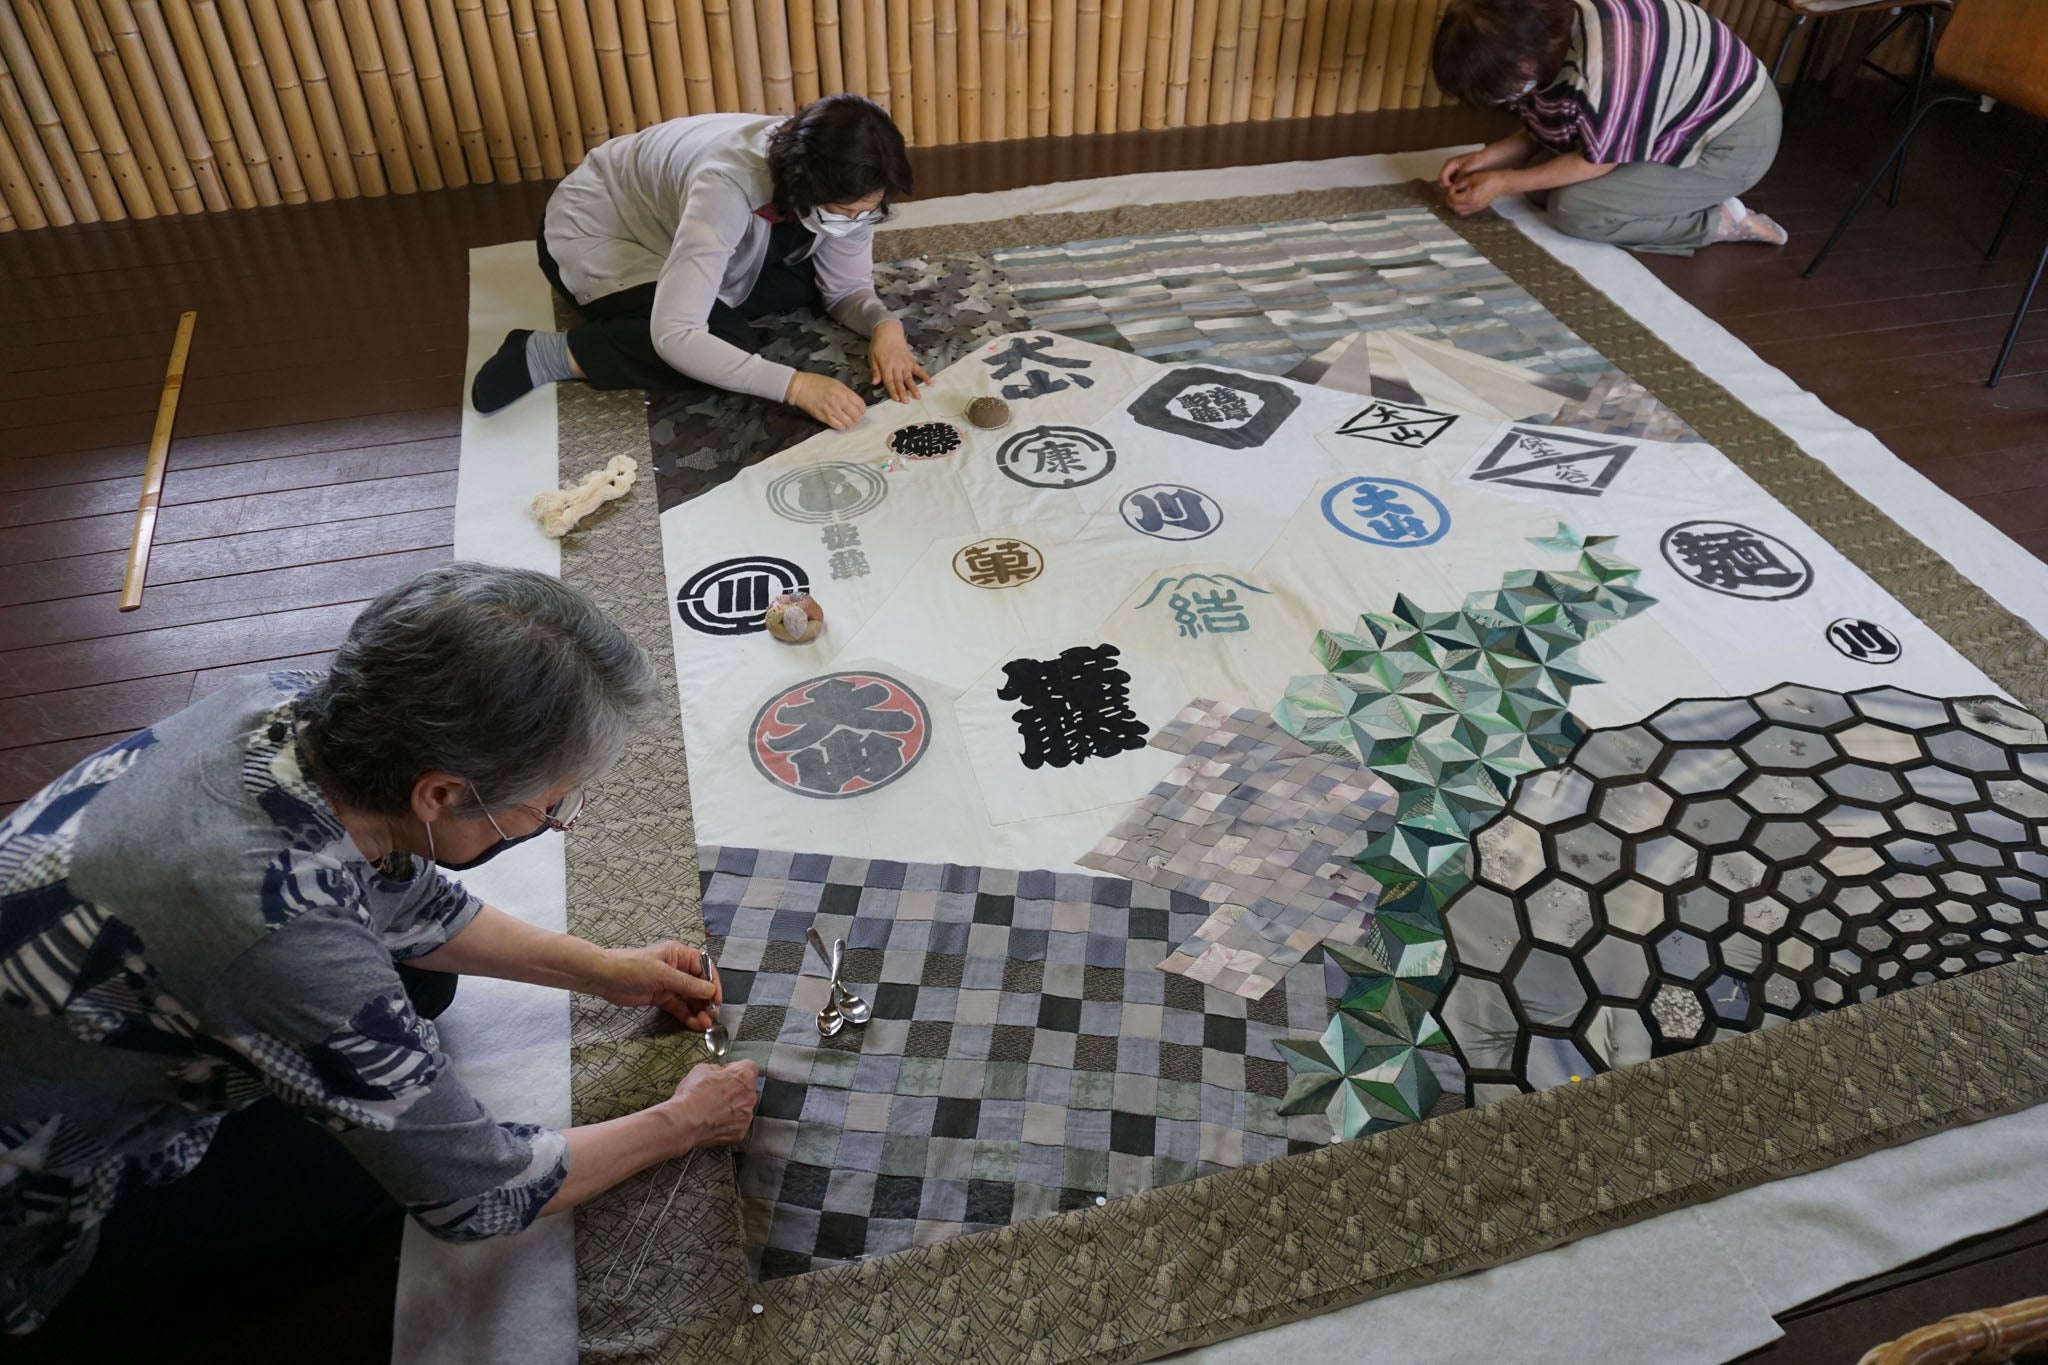 Working on the Oyama Pilgrimage Quilt